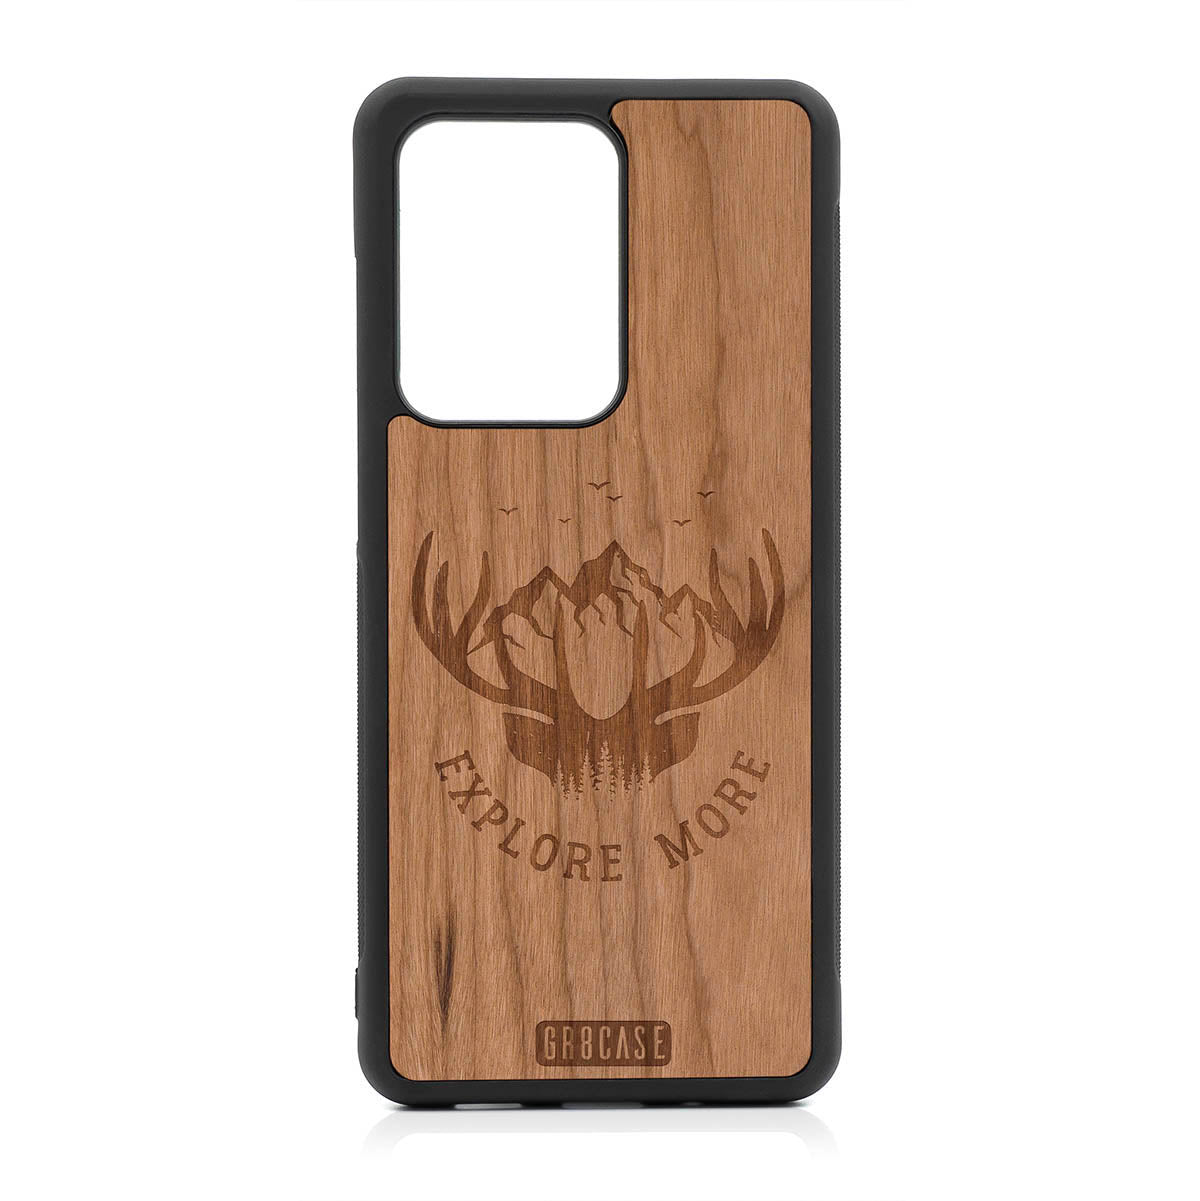 Explore More (Forest, Mountains & Antlers) Design Wood Case For Samsung Galaxy S20 Ultra by GR8CASE